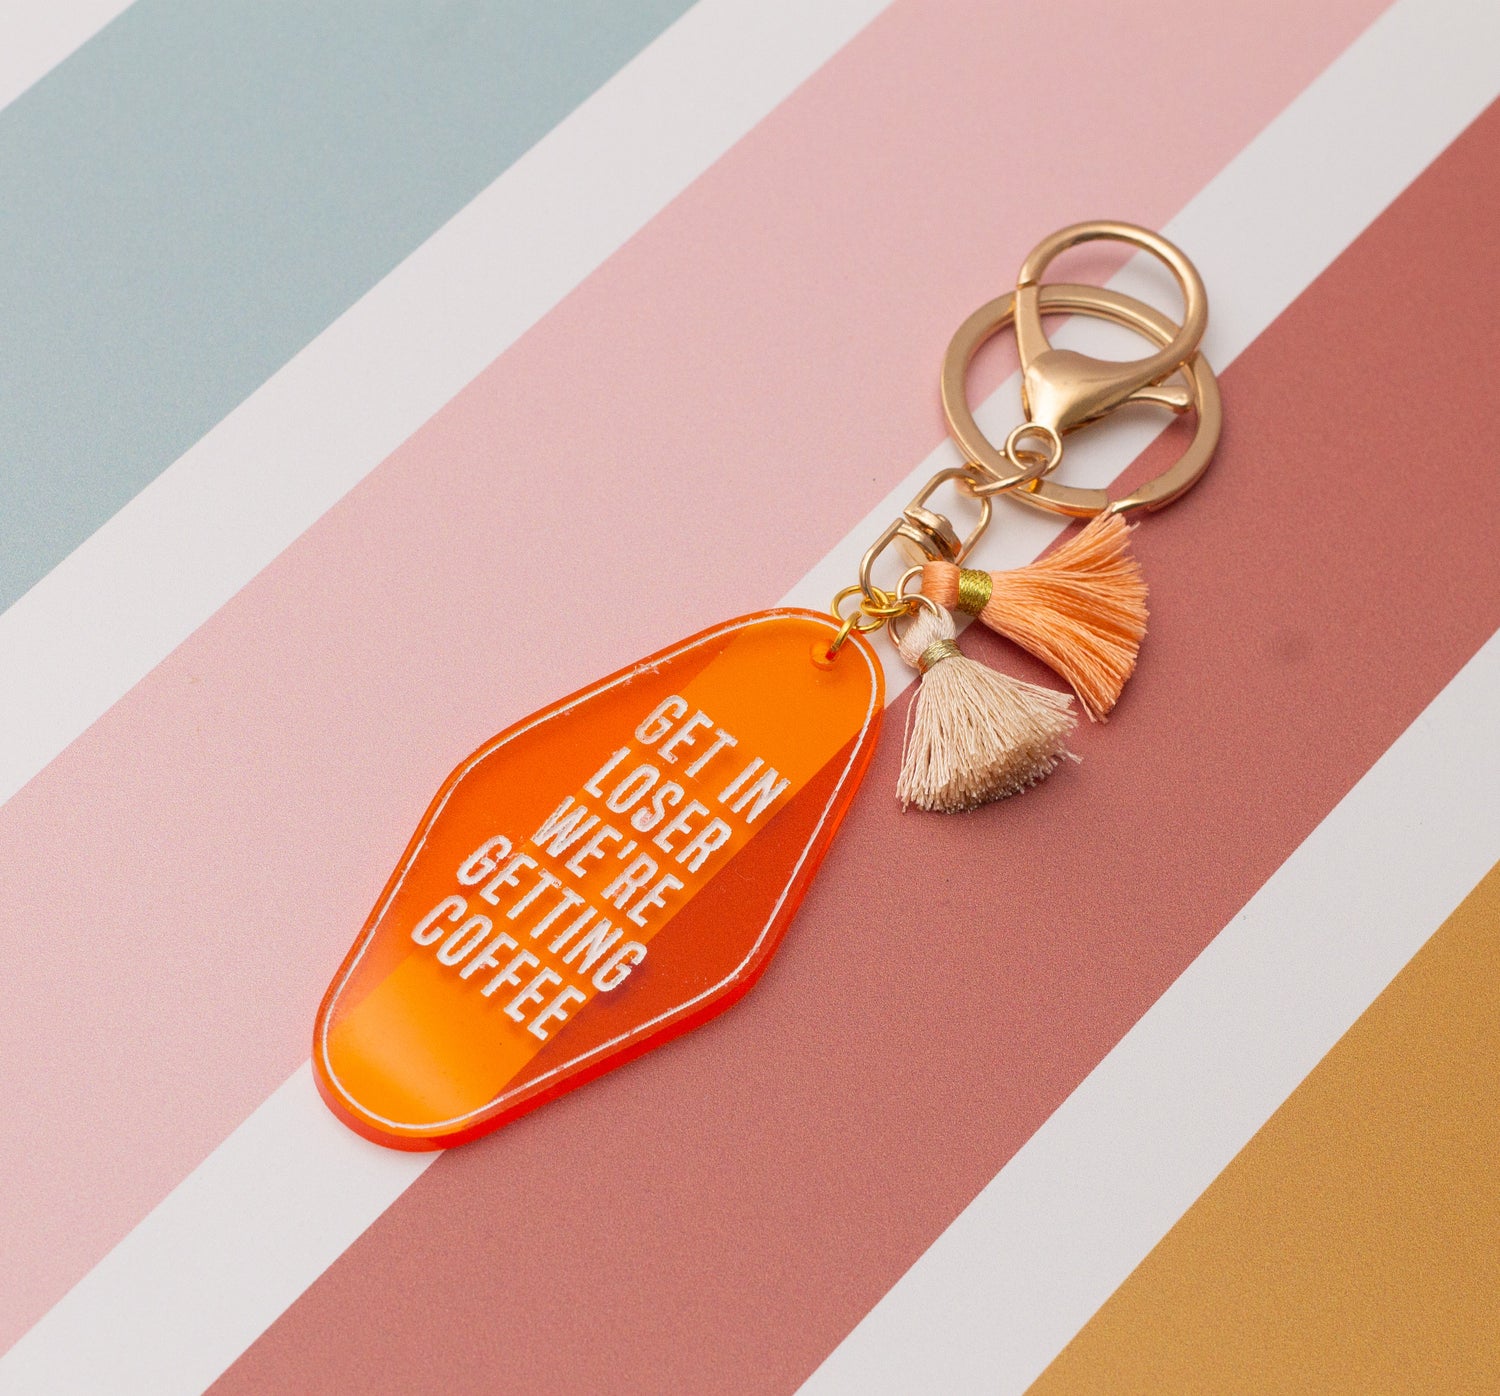 Get in Loser We're Getting Coffee - Vintage Style Acrylic Keychain